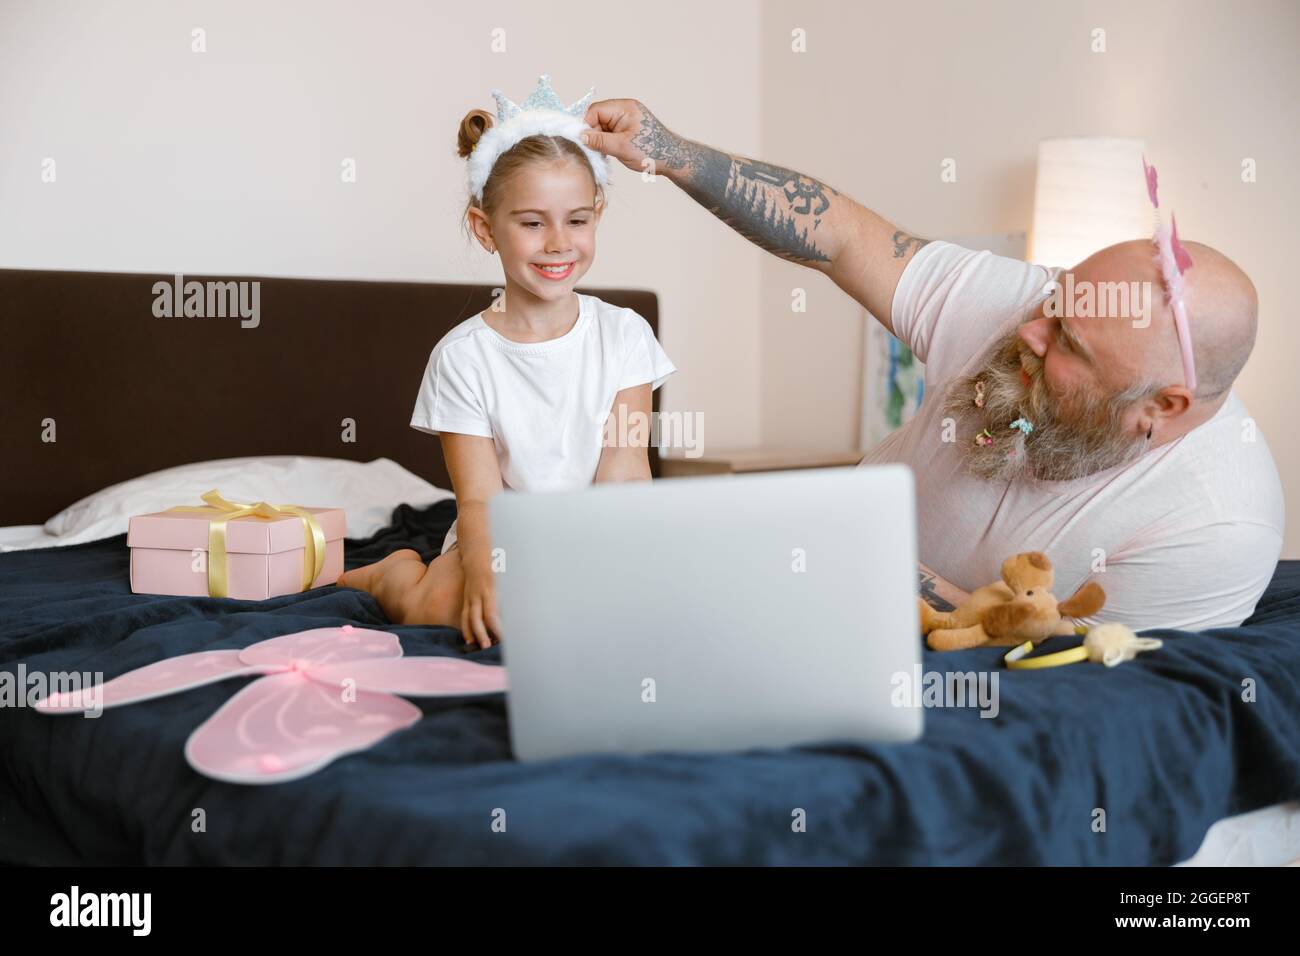 Daddy adjusts headband on head of little girl watching video on large bed at home Stock Photo